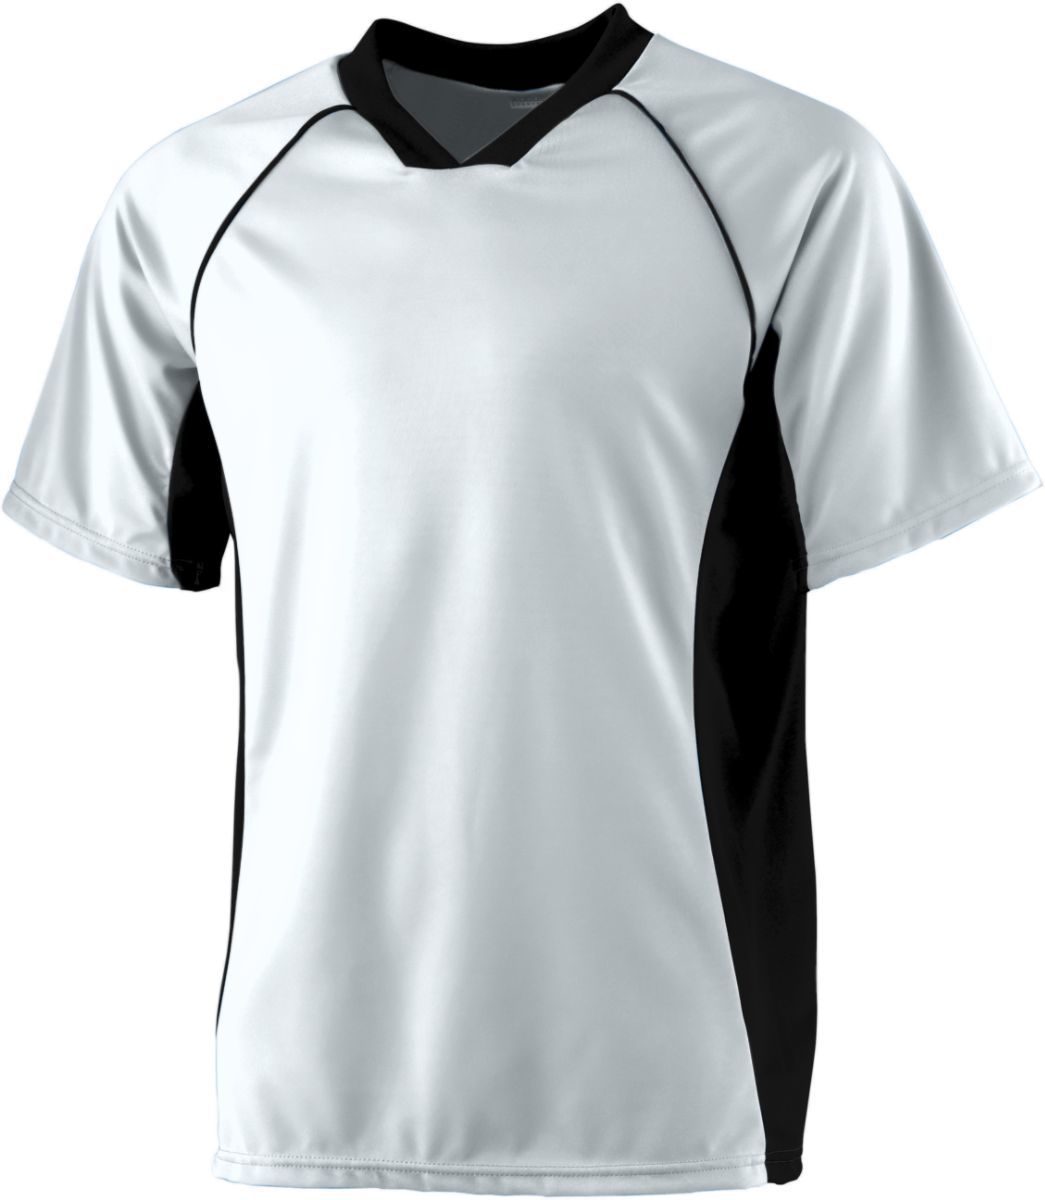 244  YOUTH WICKING SOCCER JERSEY